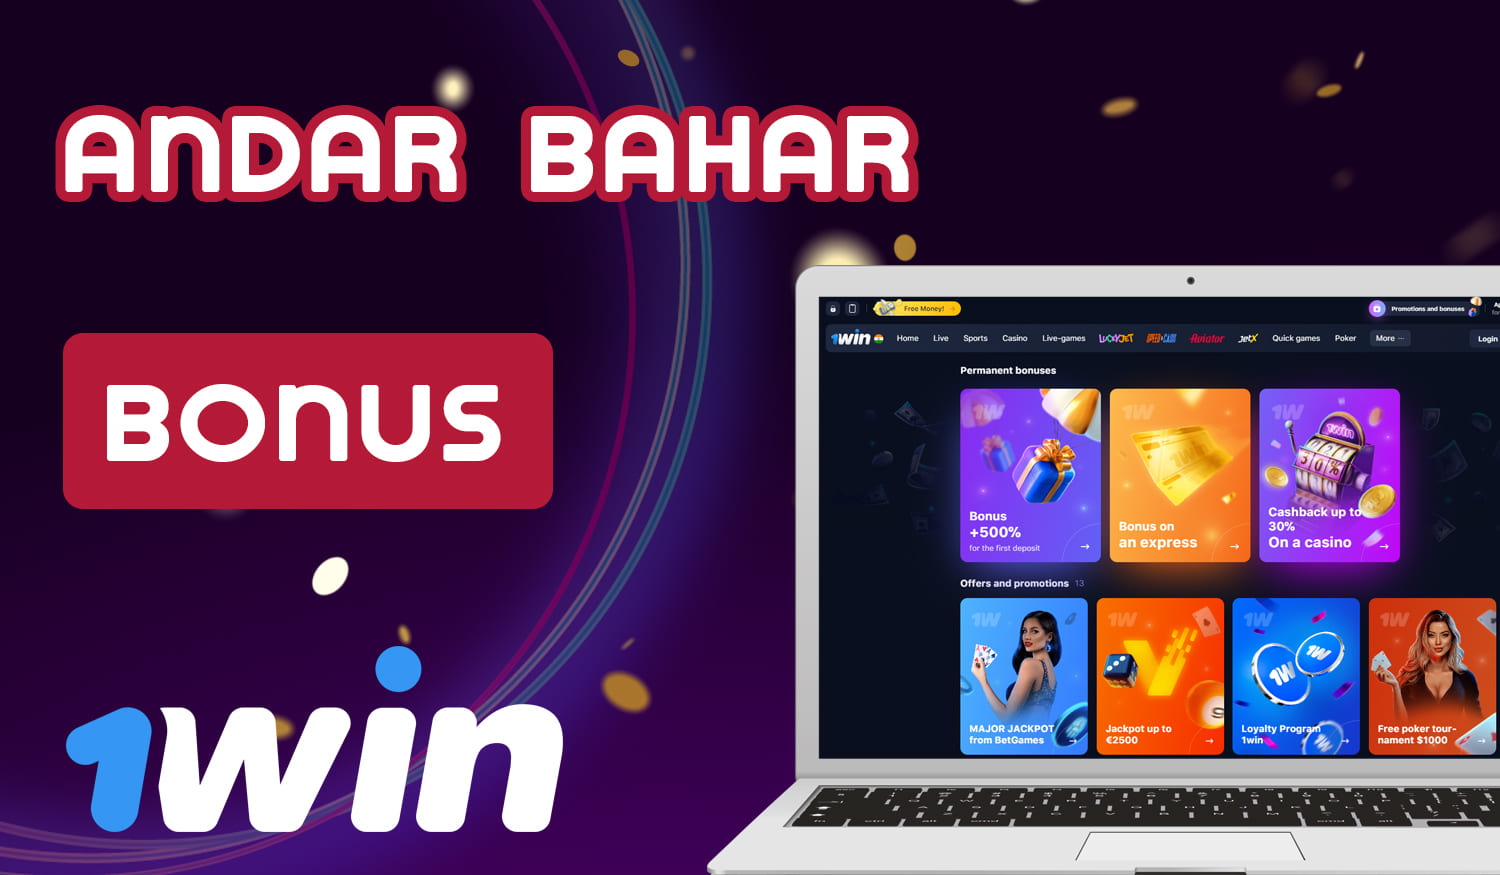 Bonuses available to Andar Bahar fans at 1win